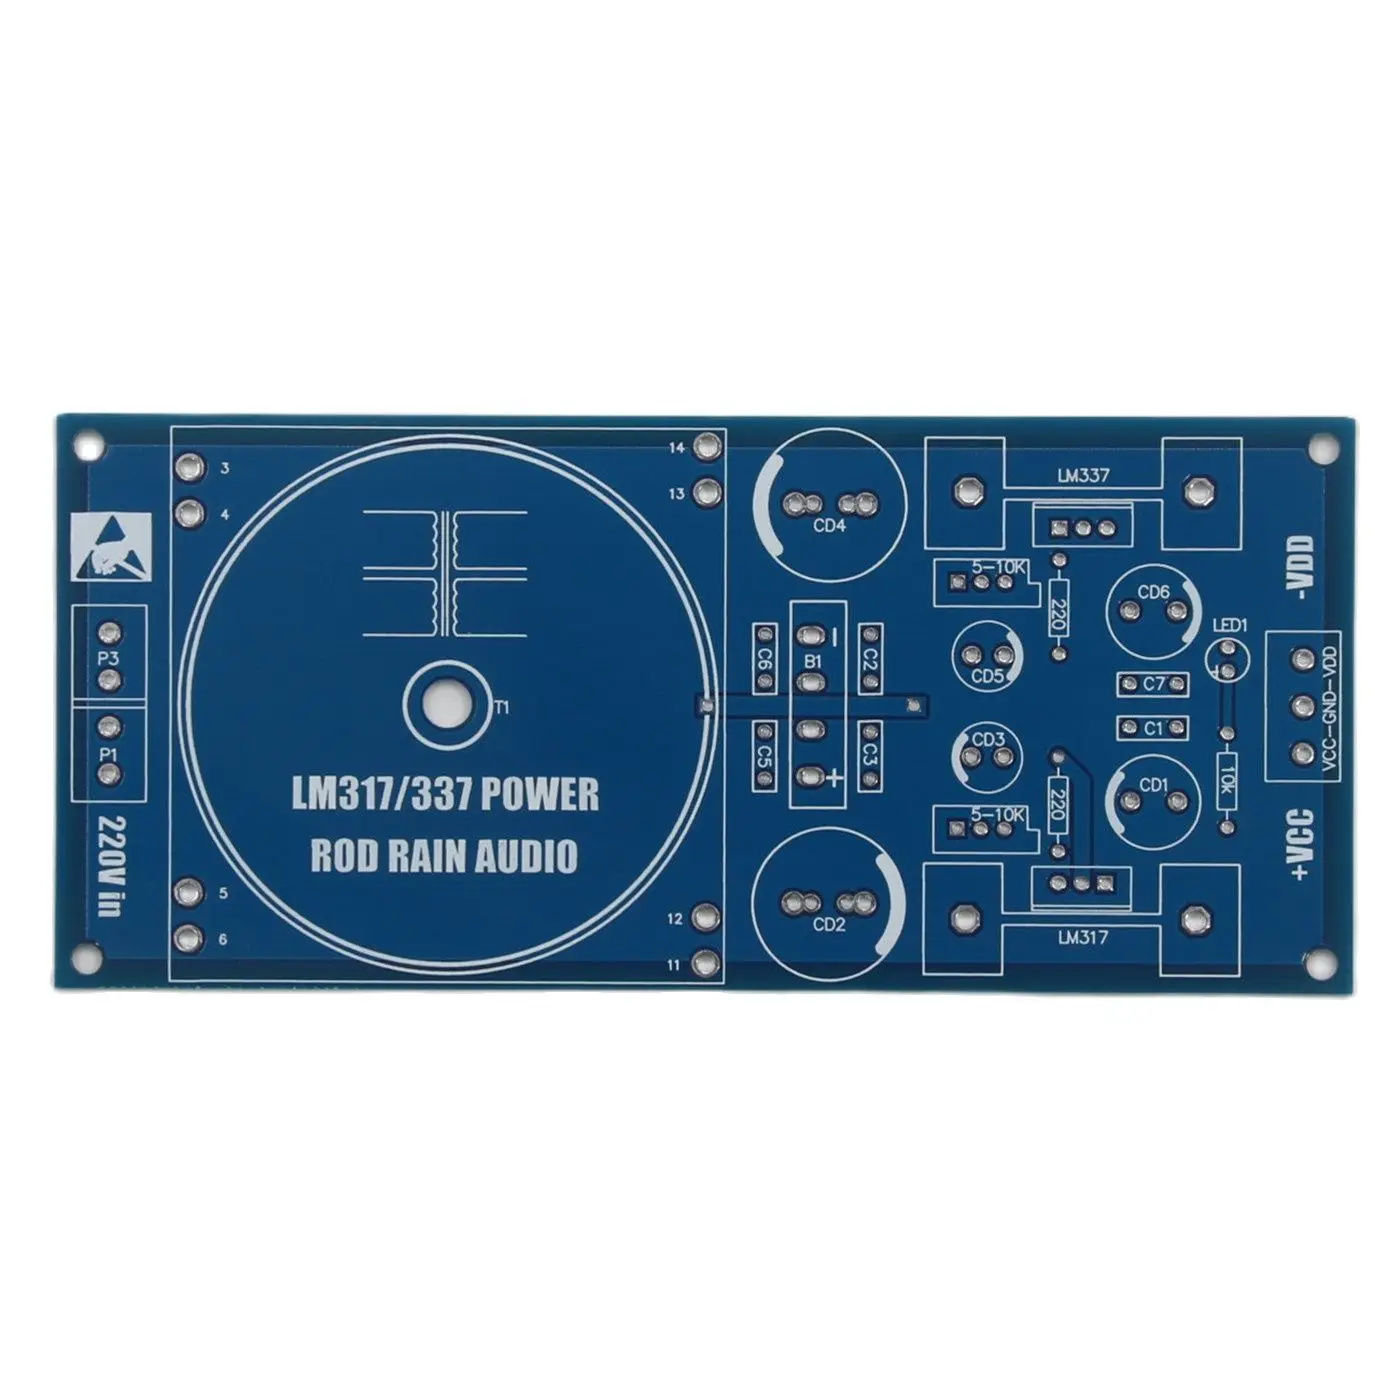 LM317 LM337 Output Dual 2.5V-24V Adjustable Regulated Power Supply Board PCB Can Be Installed Talema 15VA/25VA Transformer assembled lt1084 high power linear adjustable regulated dc power supply board hifi linear psu finished board